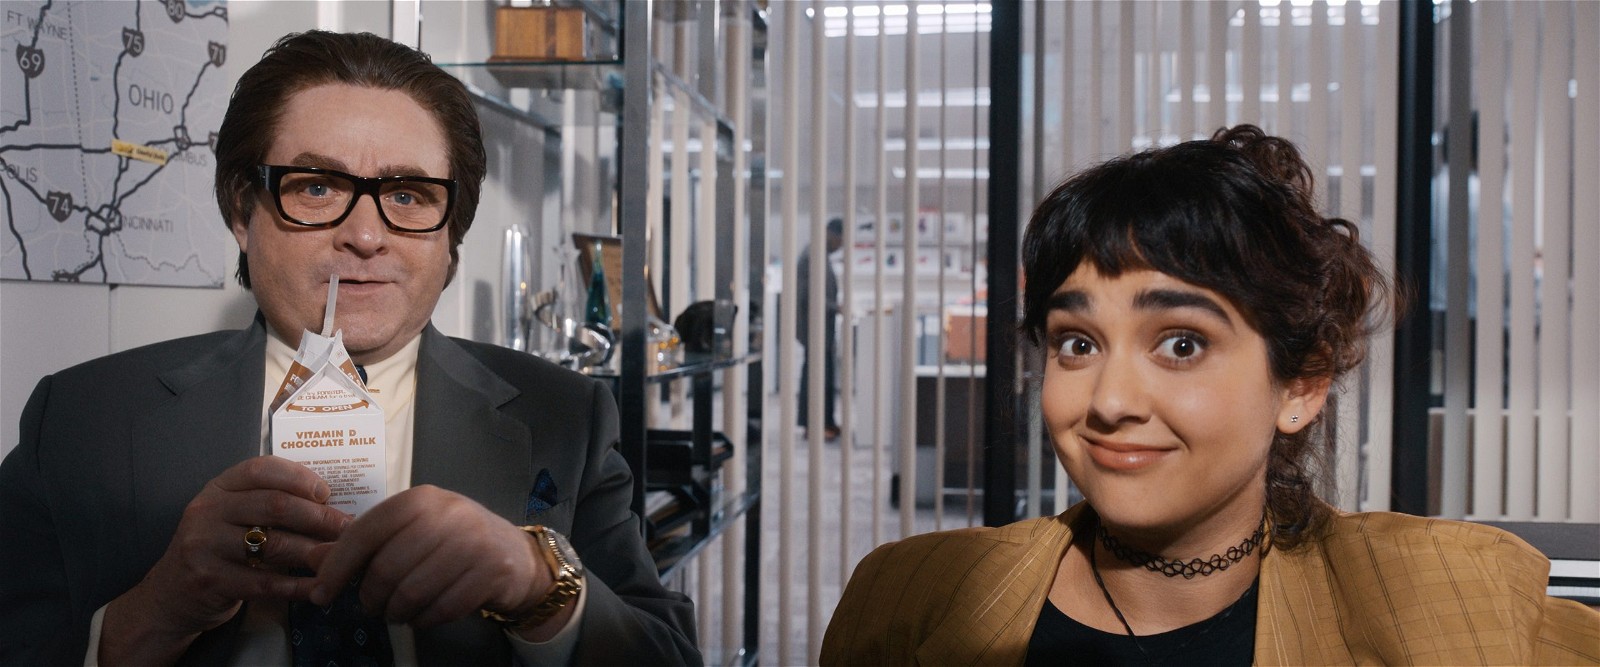 Zach Galifianakis and Geraldine Viswanathan in "The Beanie Bubble," premiering July 28, 2023 on Apple TV+.